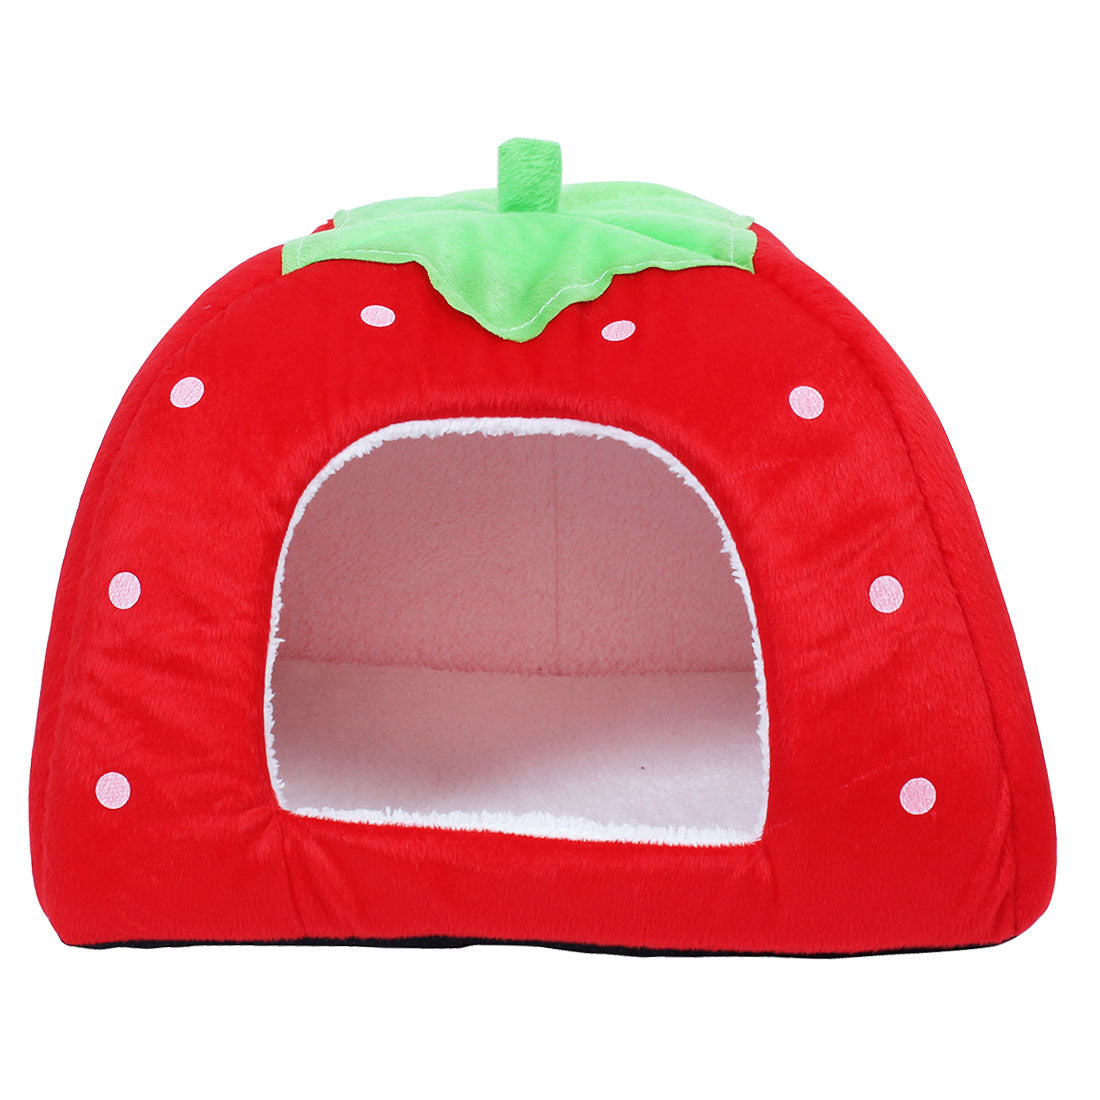 Foldable Strawberry Pet Dog Cat Bed Doggy Kennel House Puppy Basket Pat L